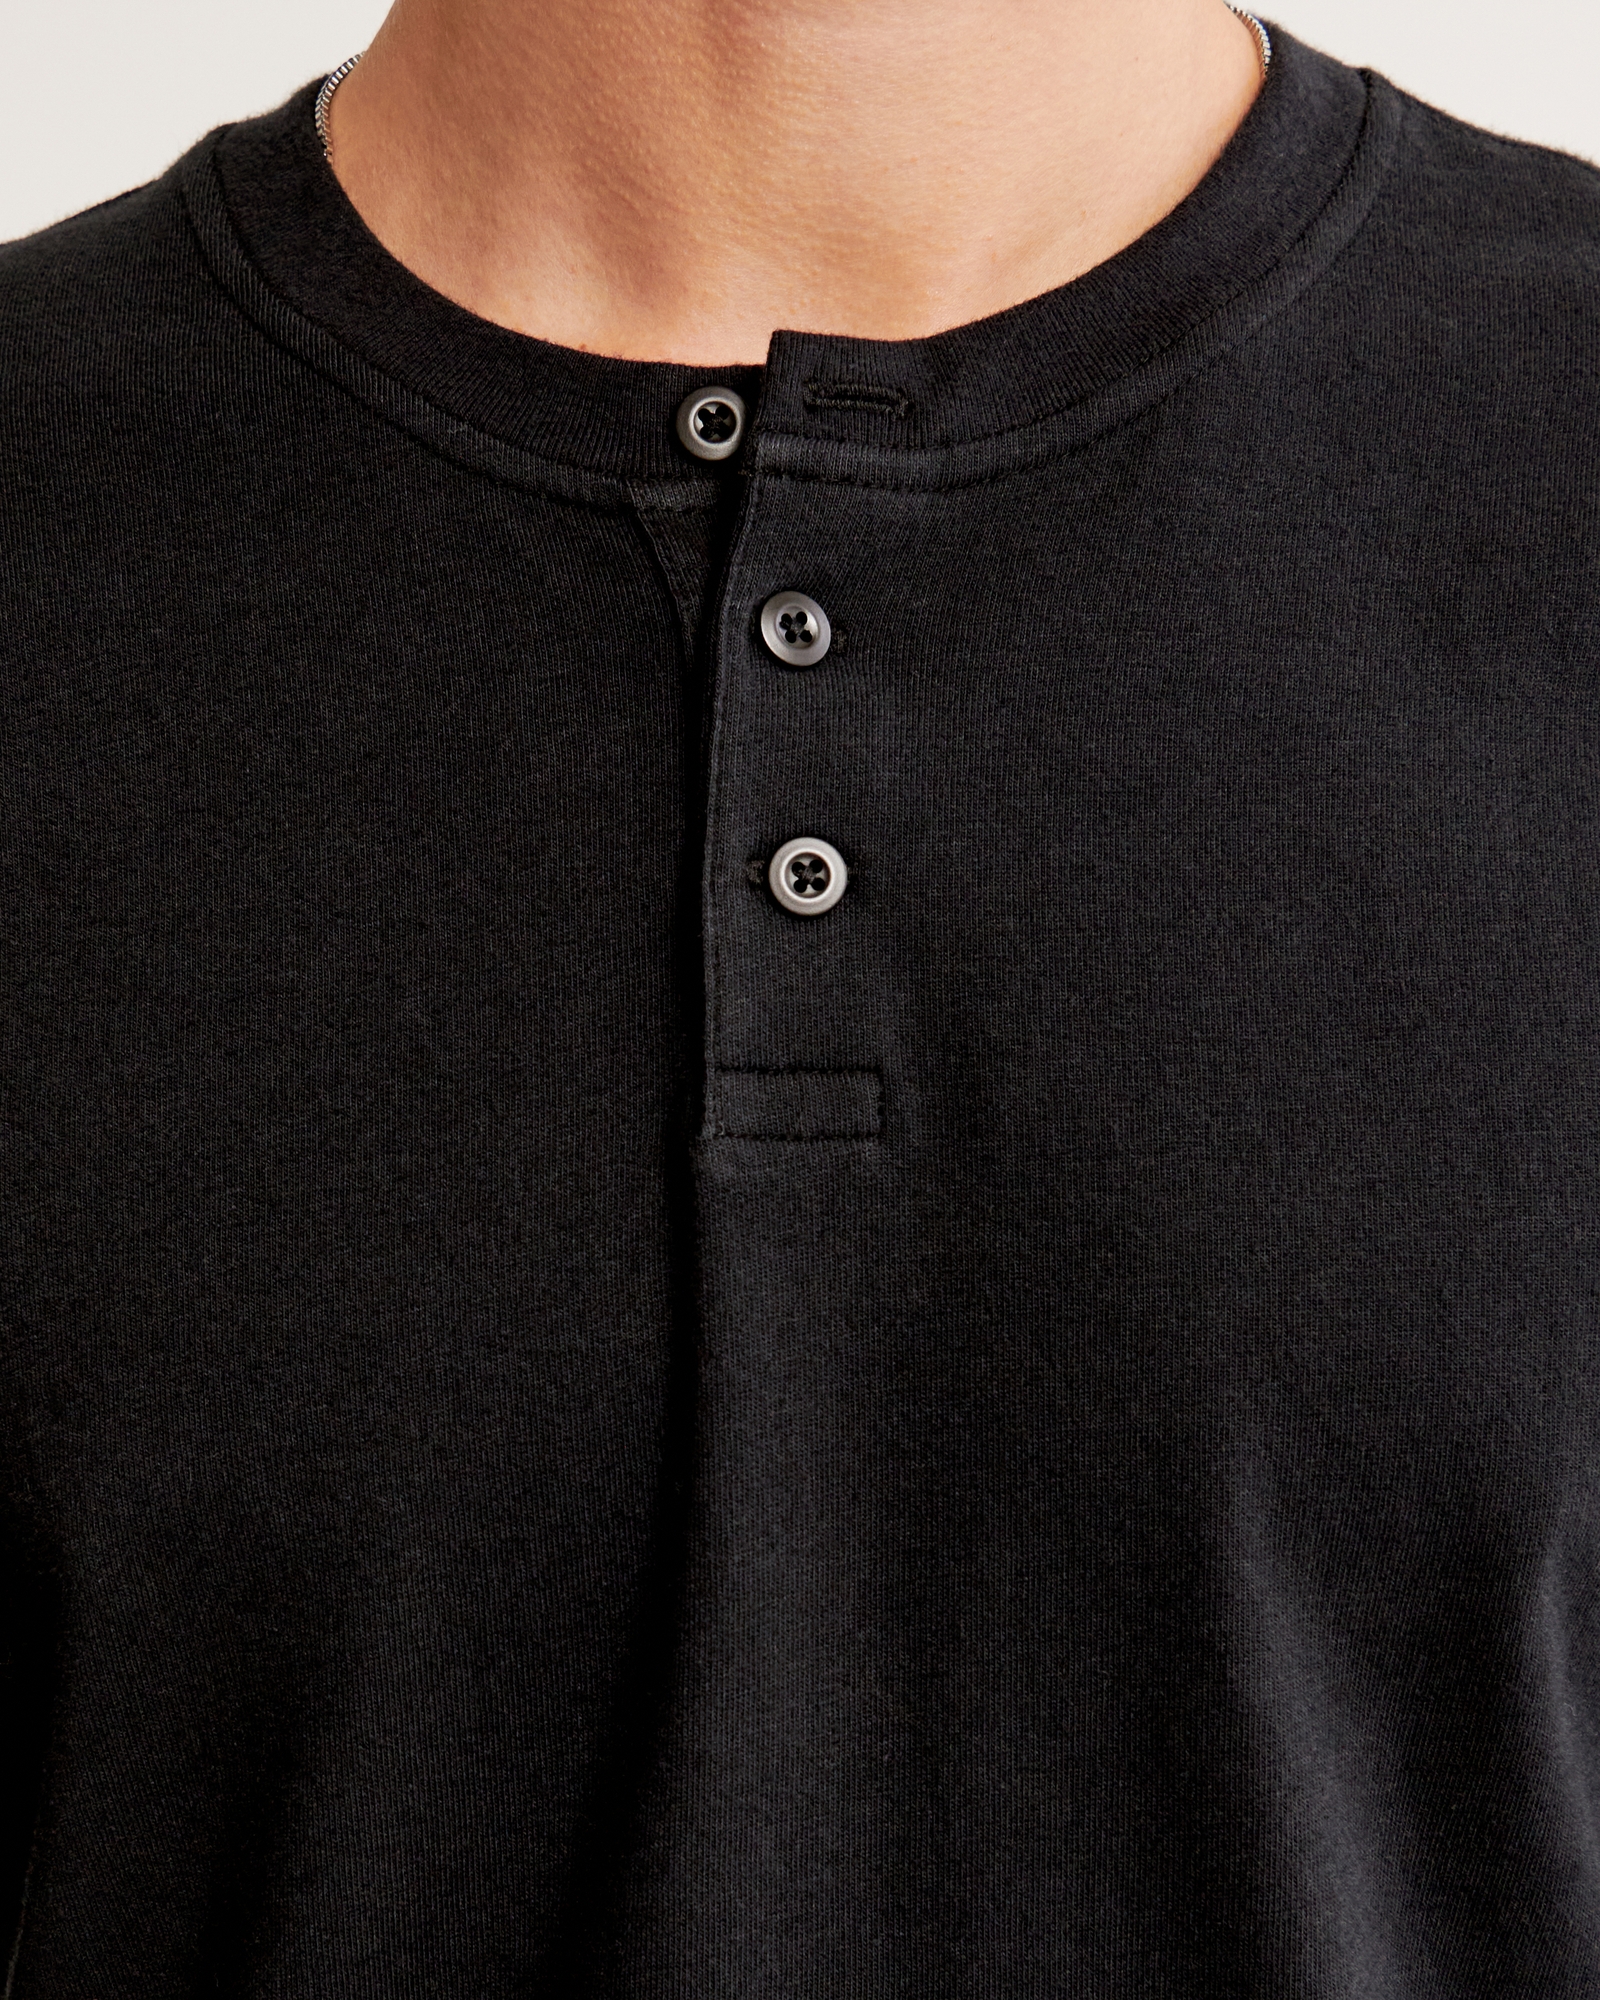   Essentials Men's Slim-Fit Long-Sleeve Waffle Henley  Shirt, Black, X-Small : Clothing, Shoes & Jewelry